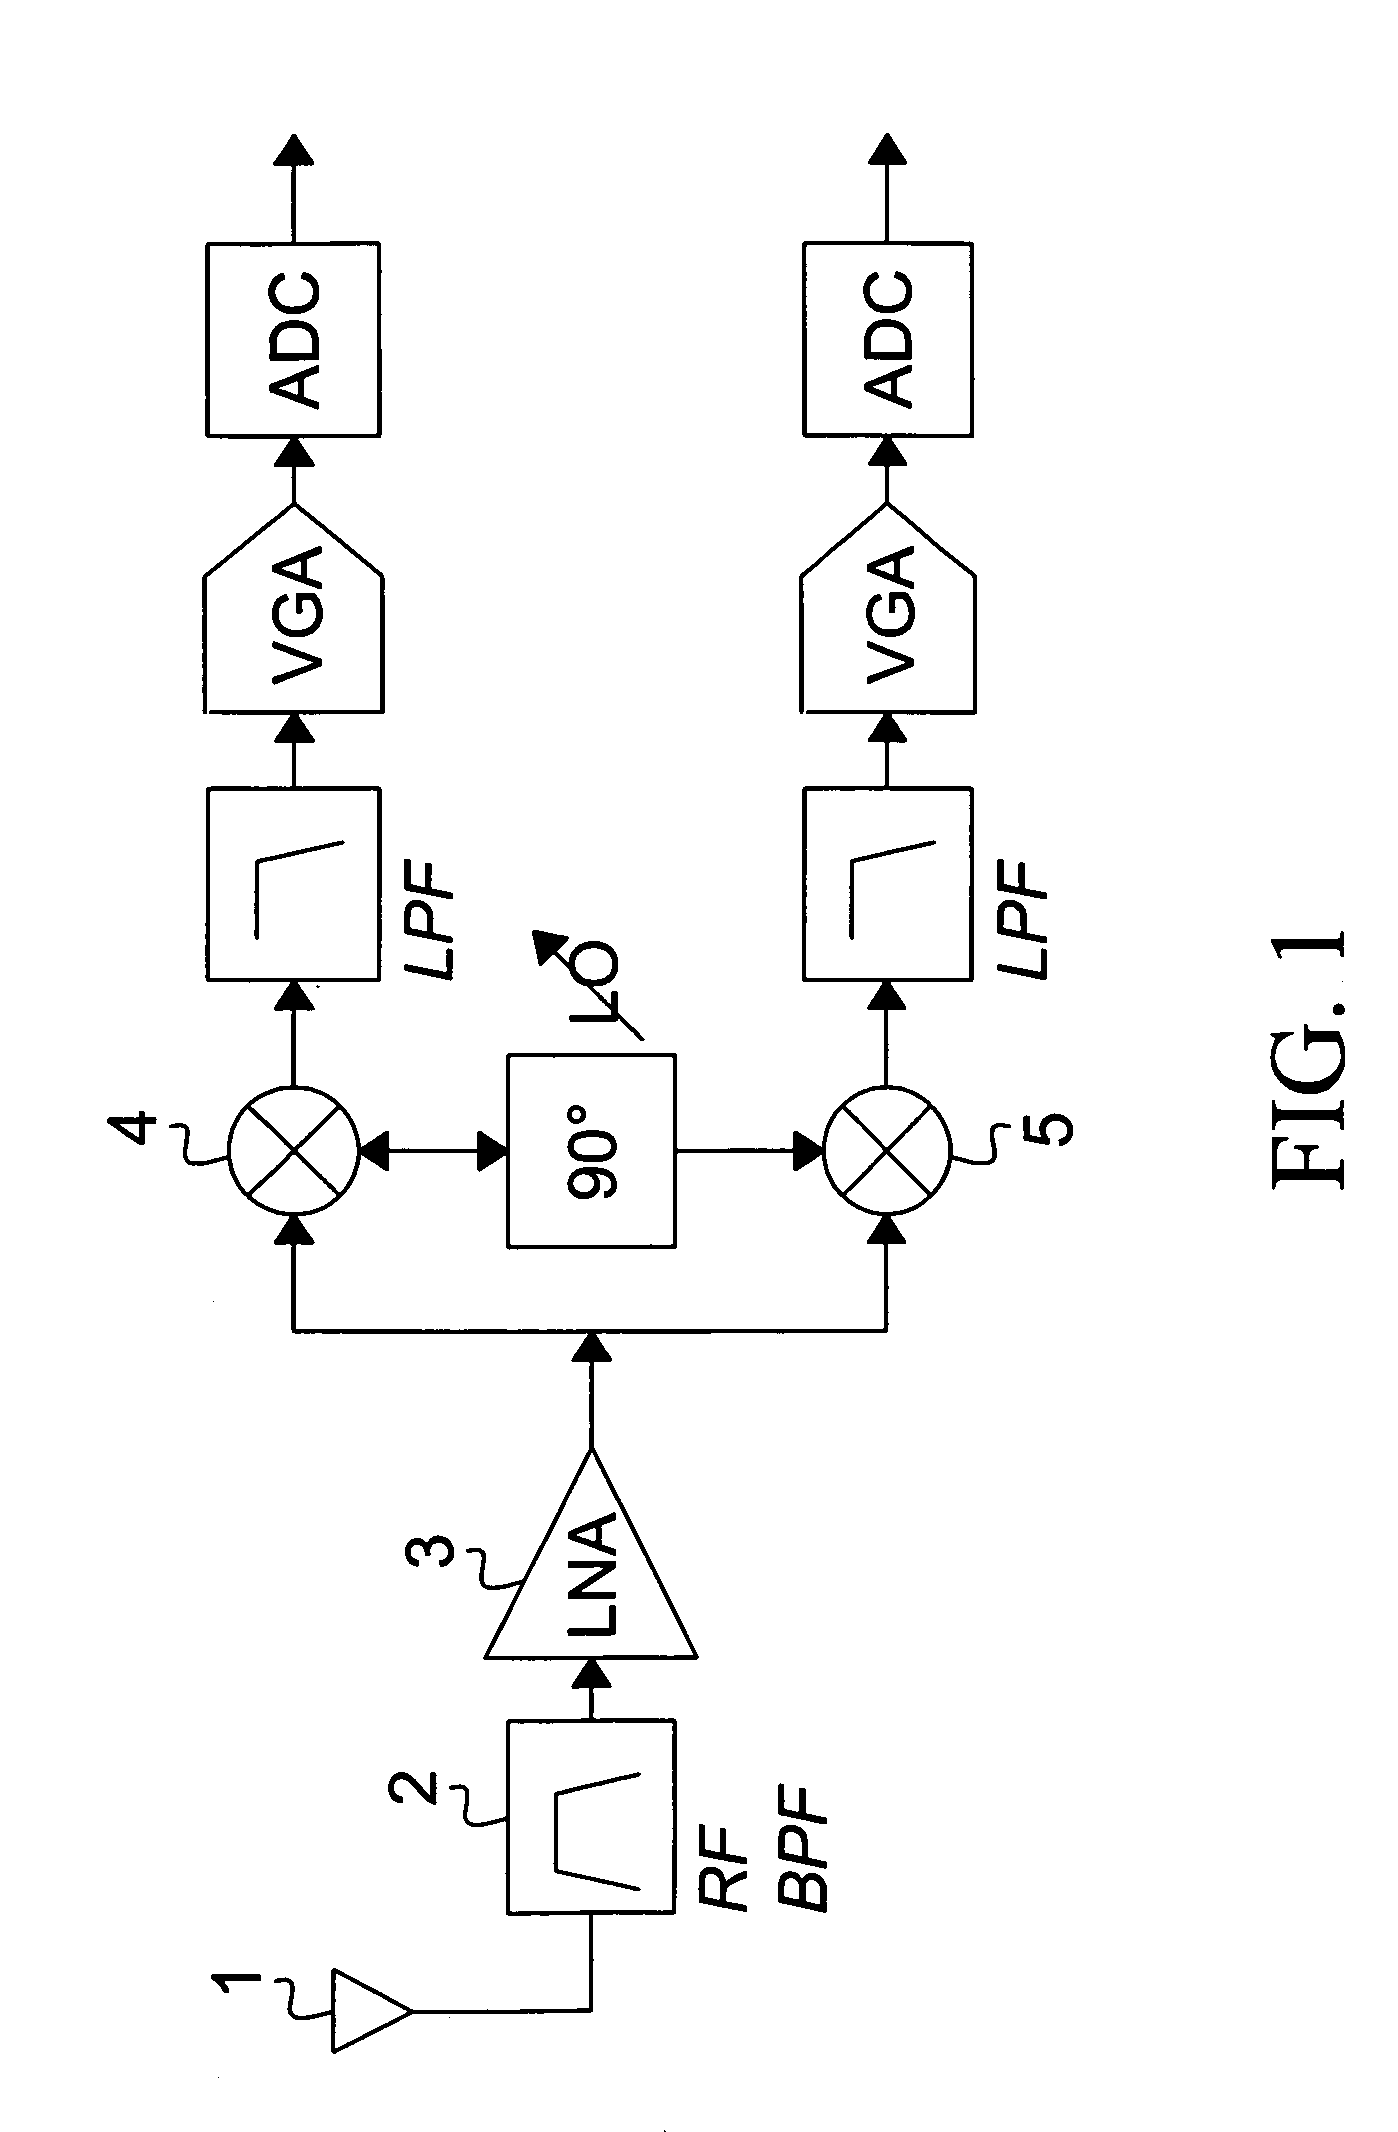 Highly linear variable gain amplifier